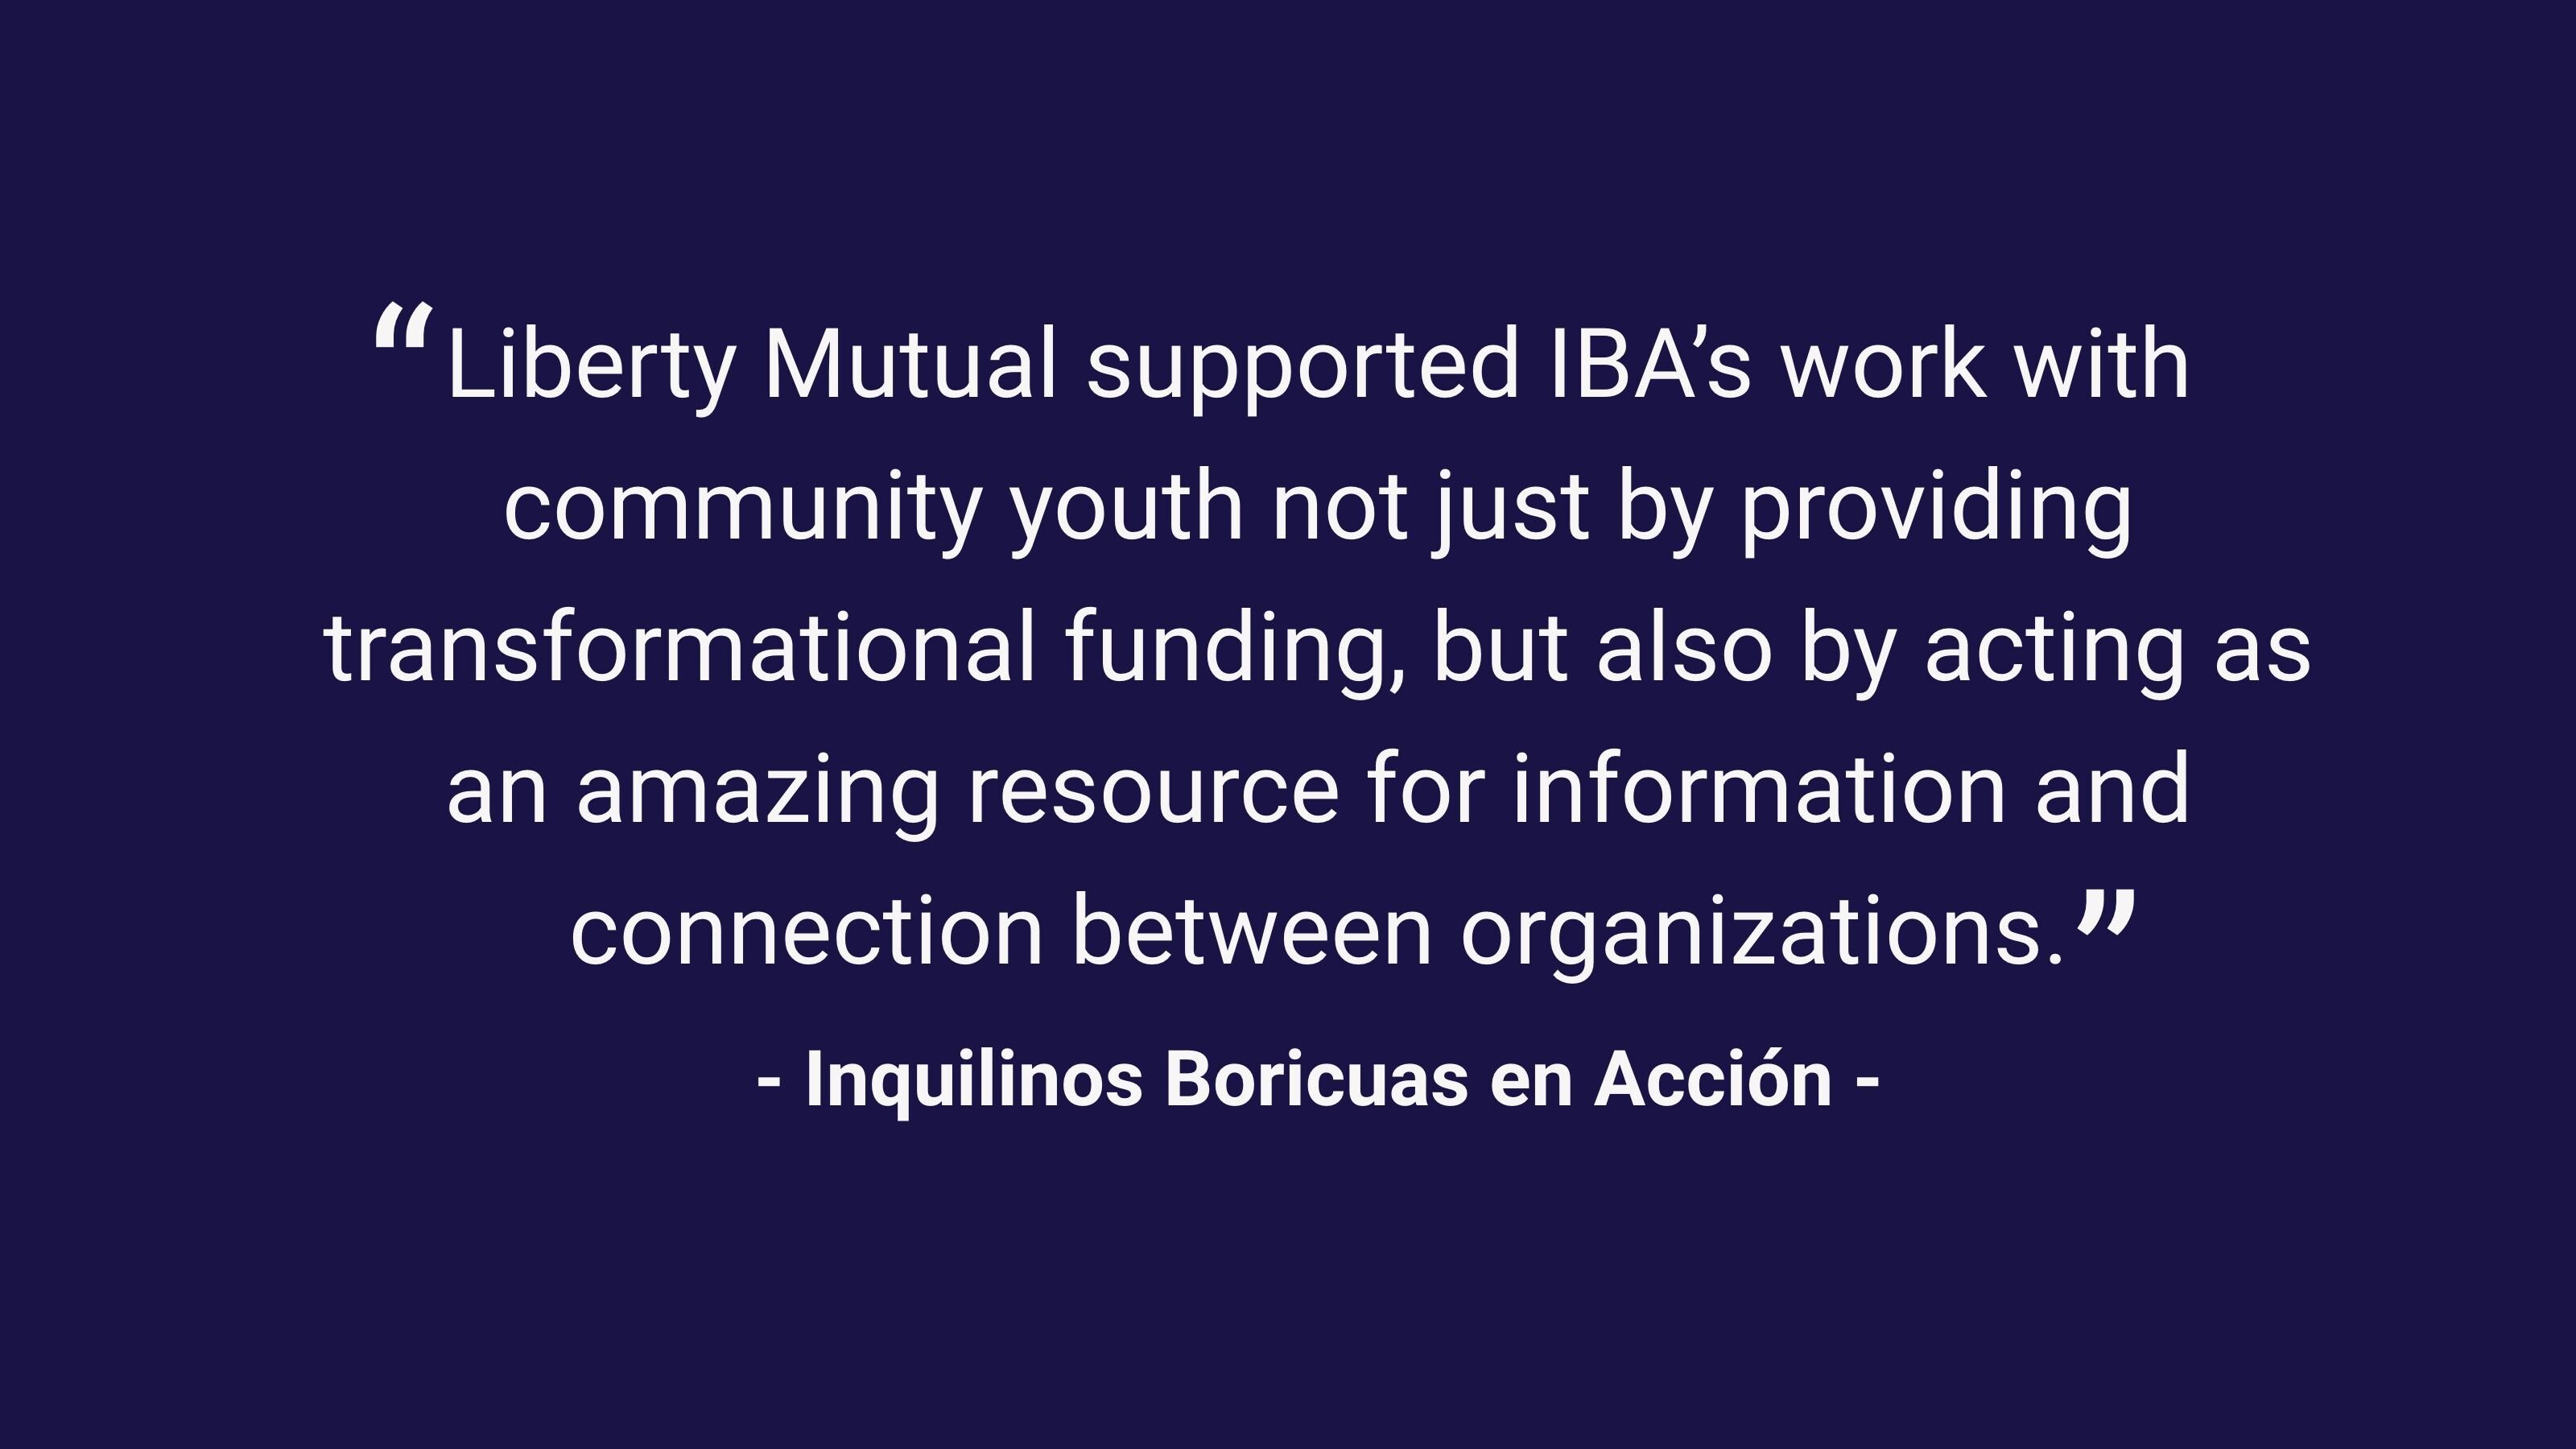 (slide 2 of 3) “Liberty Mutual supported IBA’s work with community youth not just by providing transformational funding, but also by acting as an amazing resource for information and connection between organizations.” –Inquilinos Boricuas en Acción. 